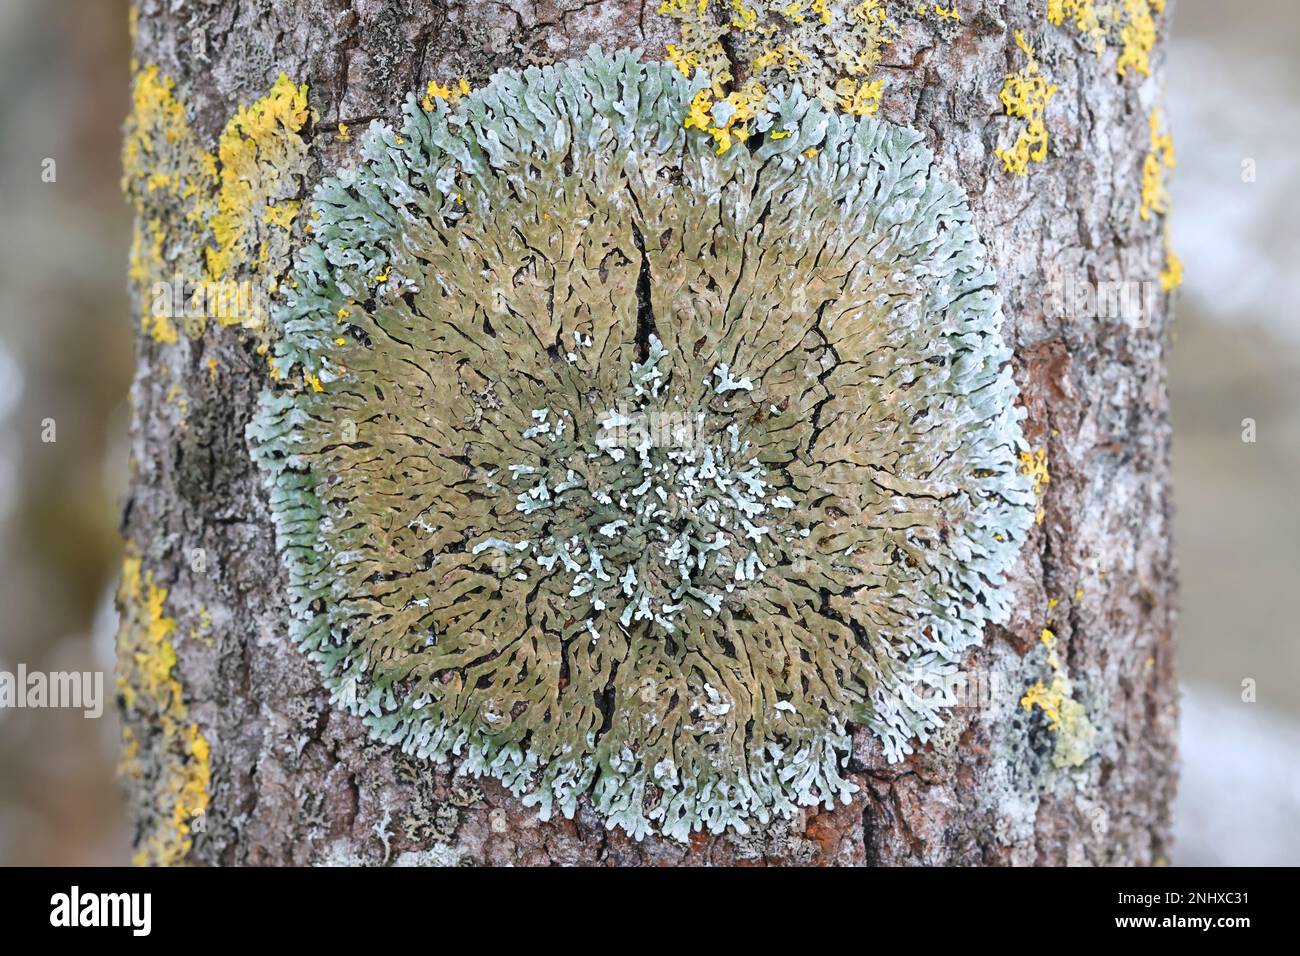 Physconia distorta, an epiphytic lichen growing on aspen in Finland Stock Photo